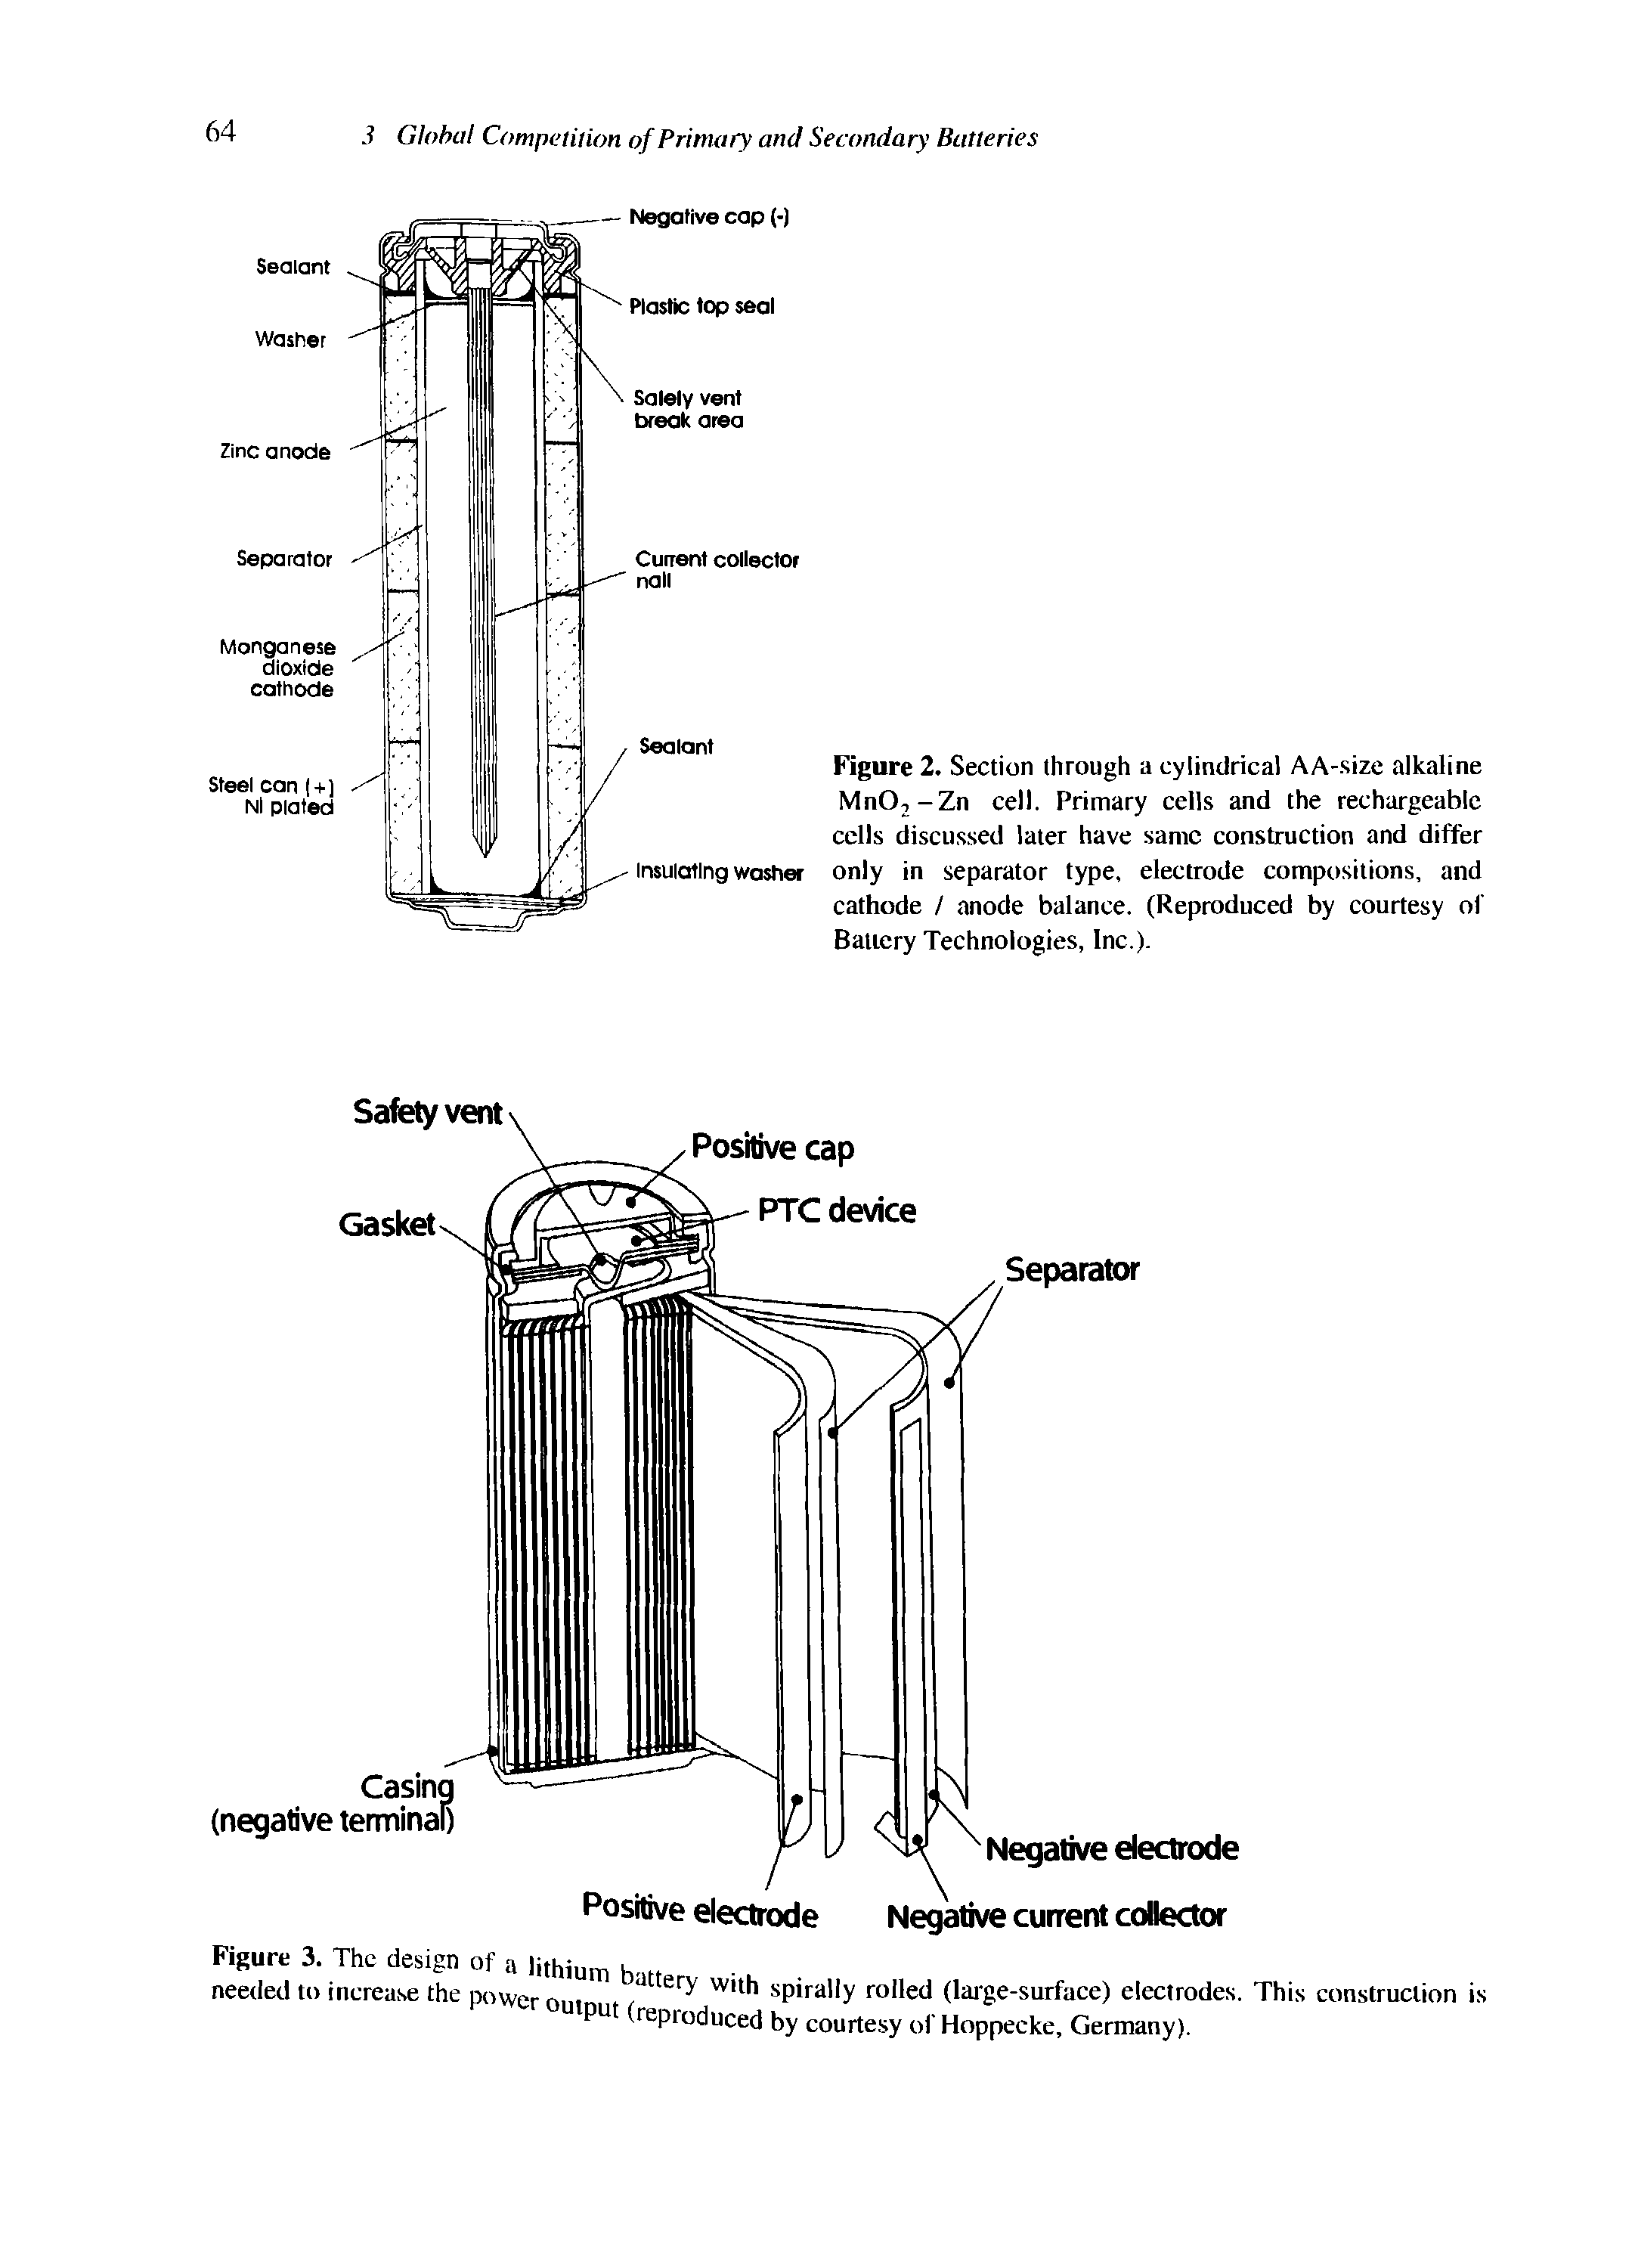 Figure 2. Section through a cylindrical AA-size alkaline Mn02-Zn cell. Primary cells and the rechargeable cells discussed later have same construction and differ only in separator type, electrode compositions, and cathode / anode balance. (Reproduced by courtesy of Battery Technologies, Inc.).